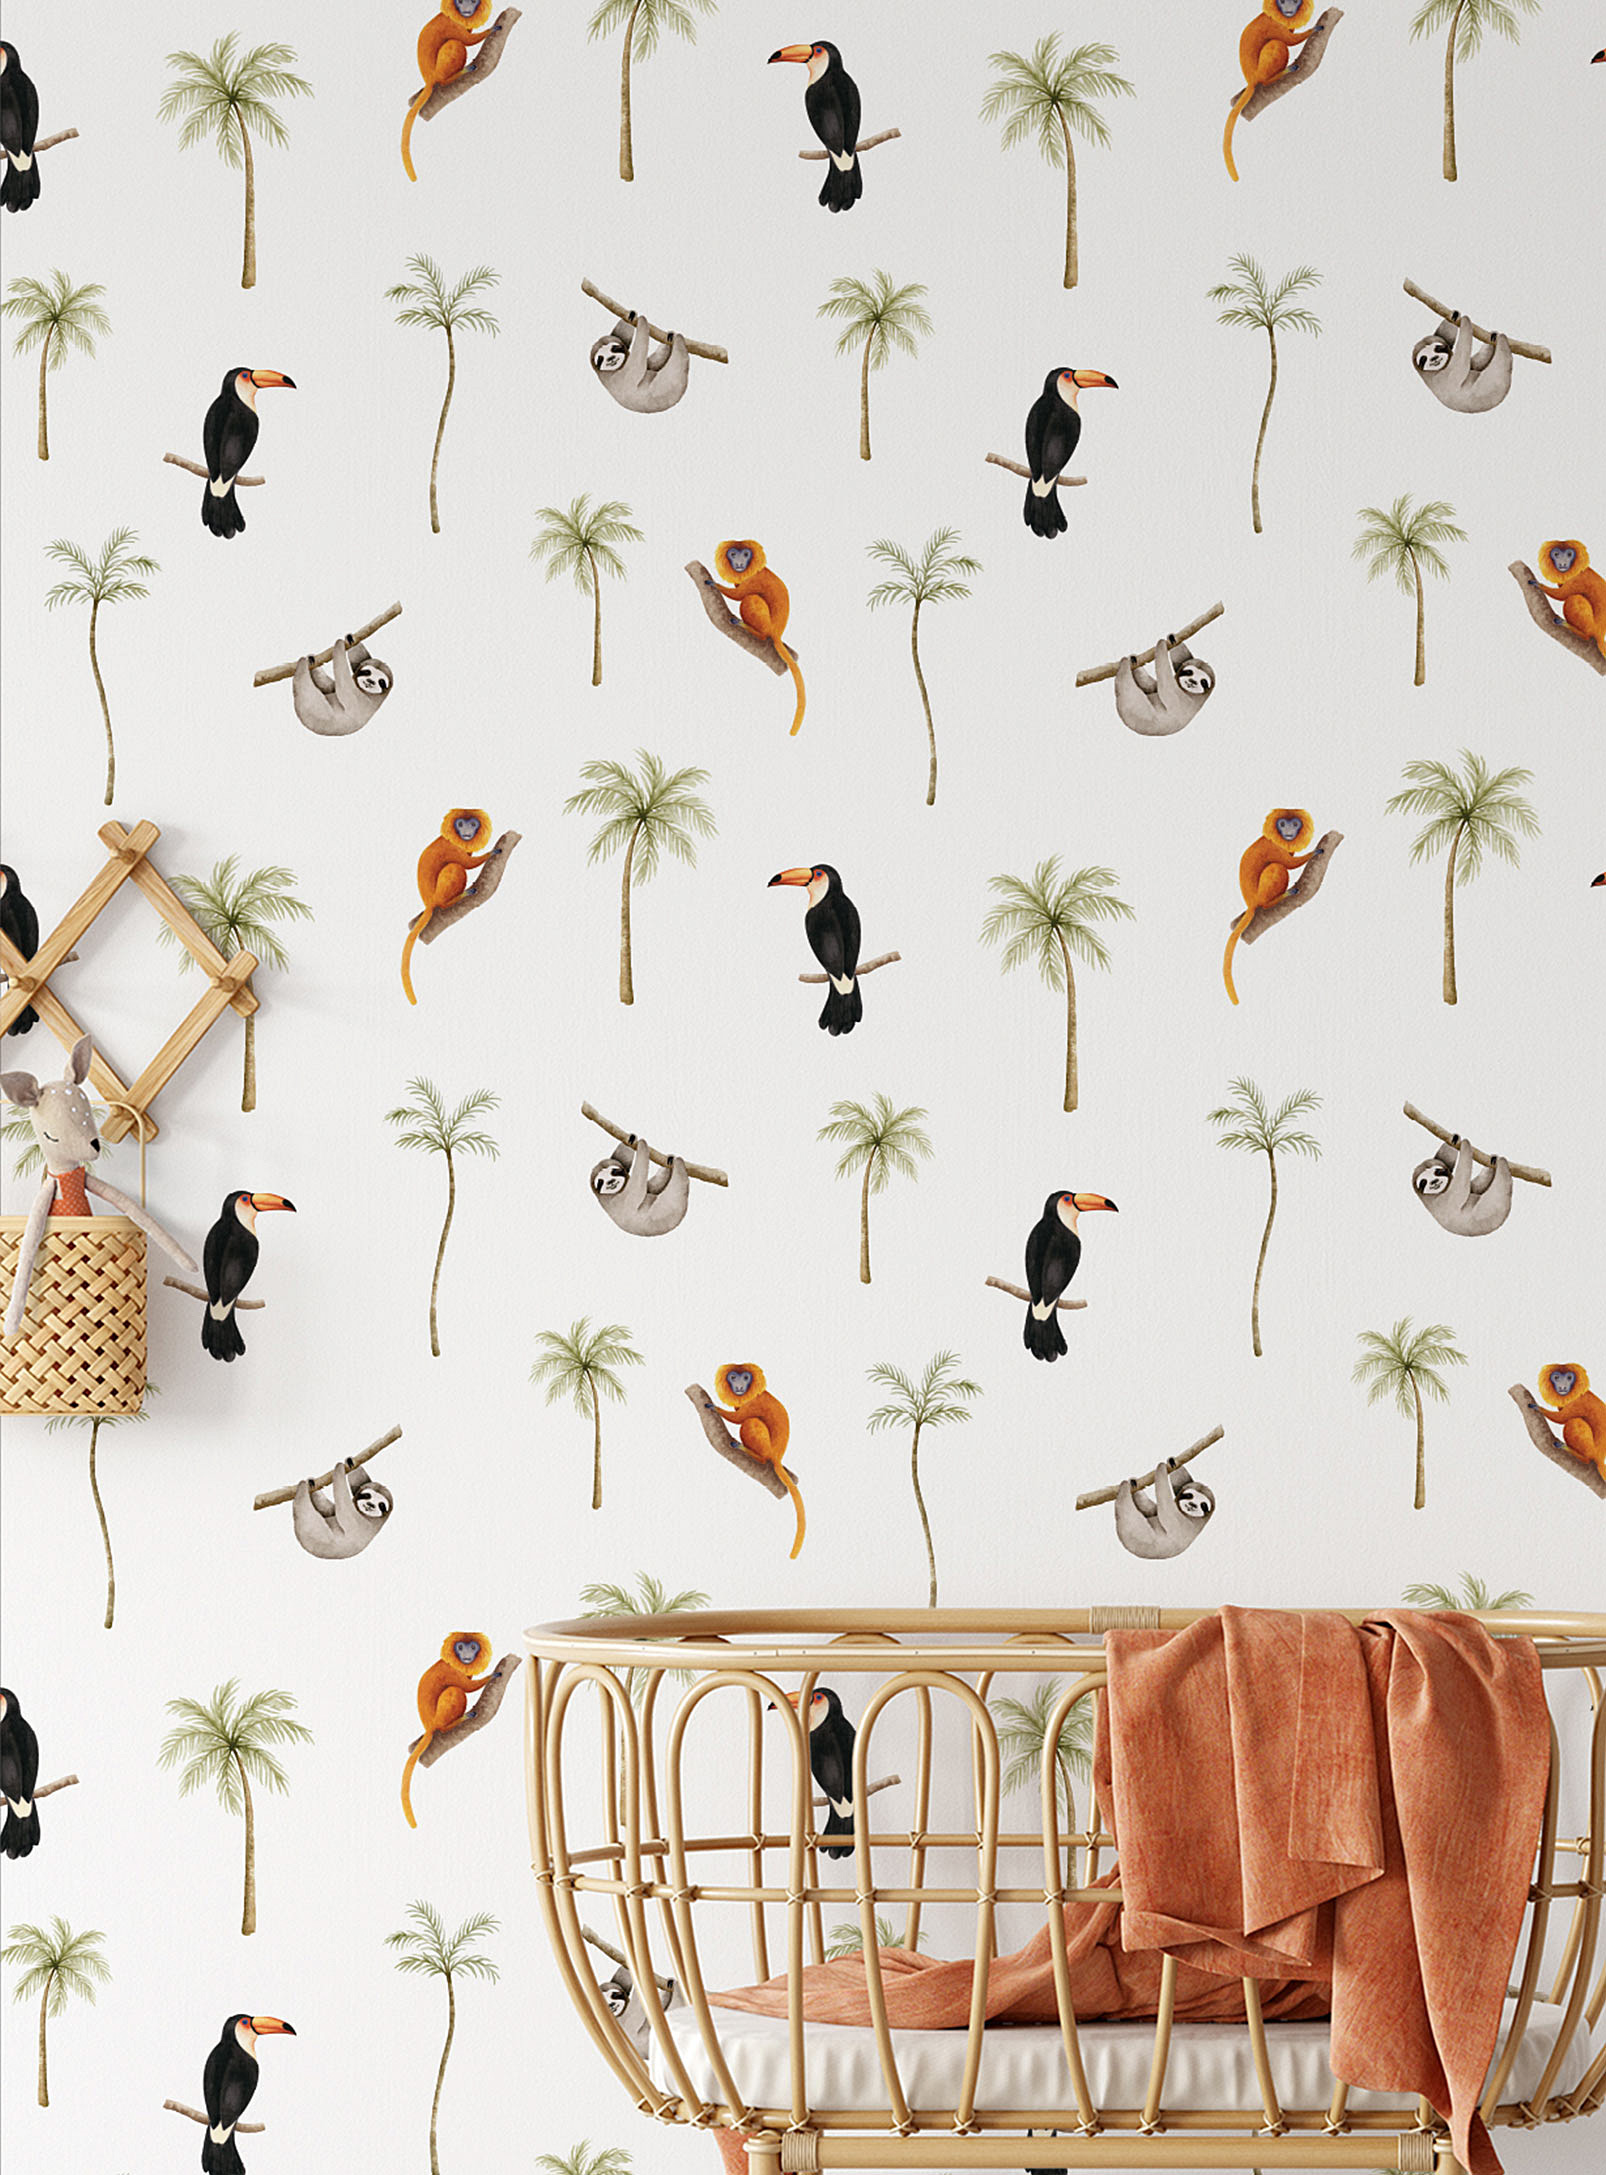 Meraki Welcome To The Jungle Self-adhesive Wallpaper Strip In Collaboration With Artist Marie-lise Leclerc In Patterned White